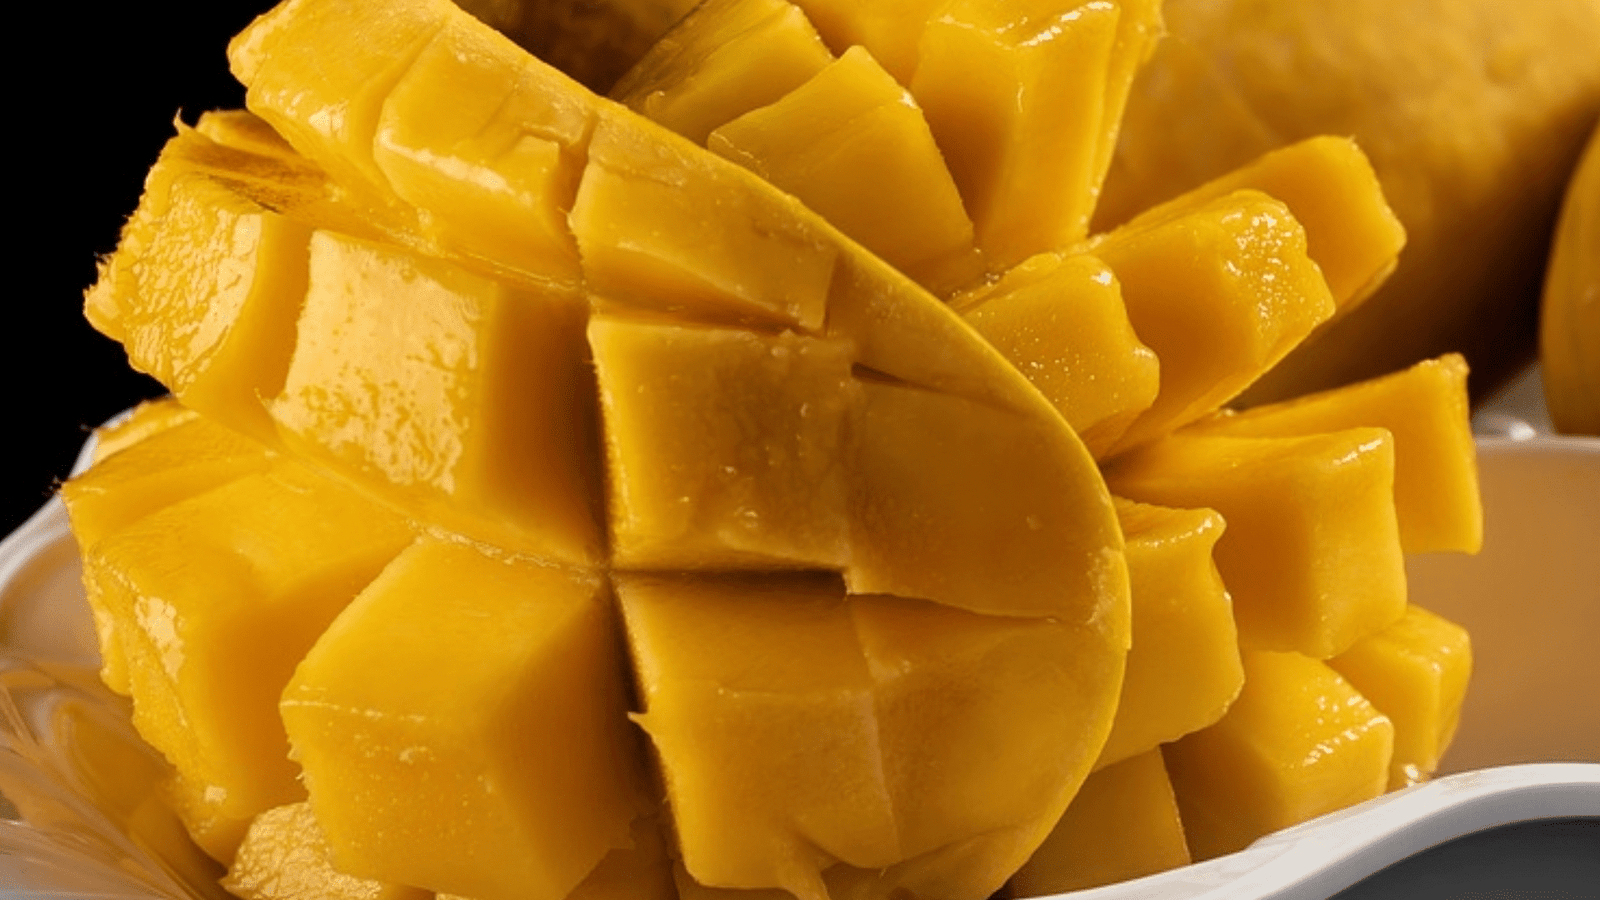 using mangoes with your cheesecake